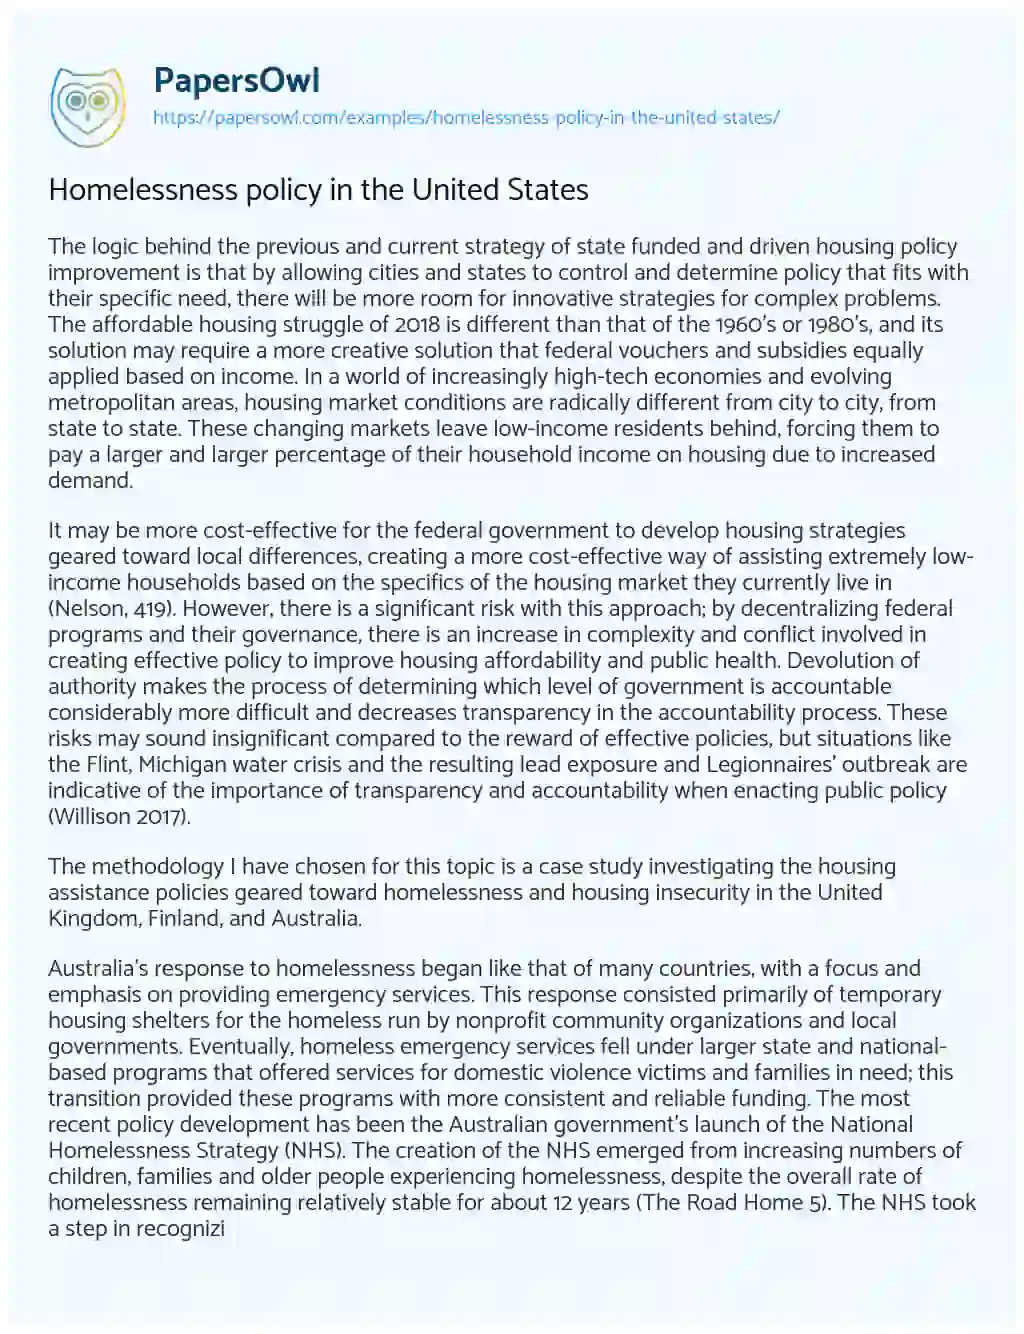 Essay on Homelessness Policy in the United States